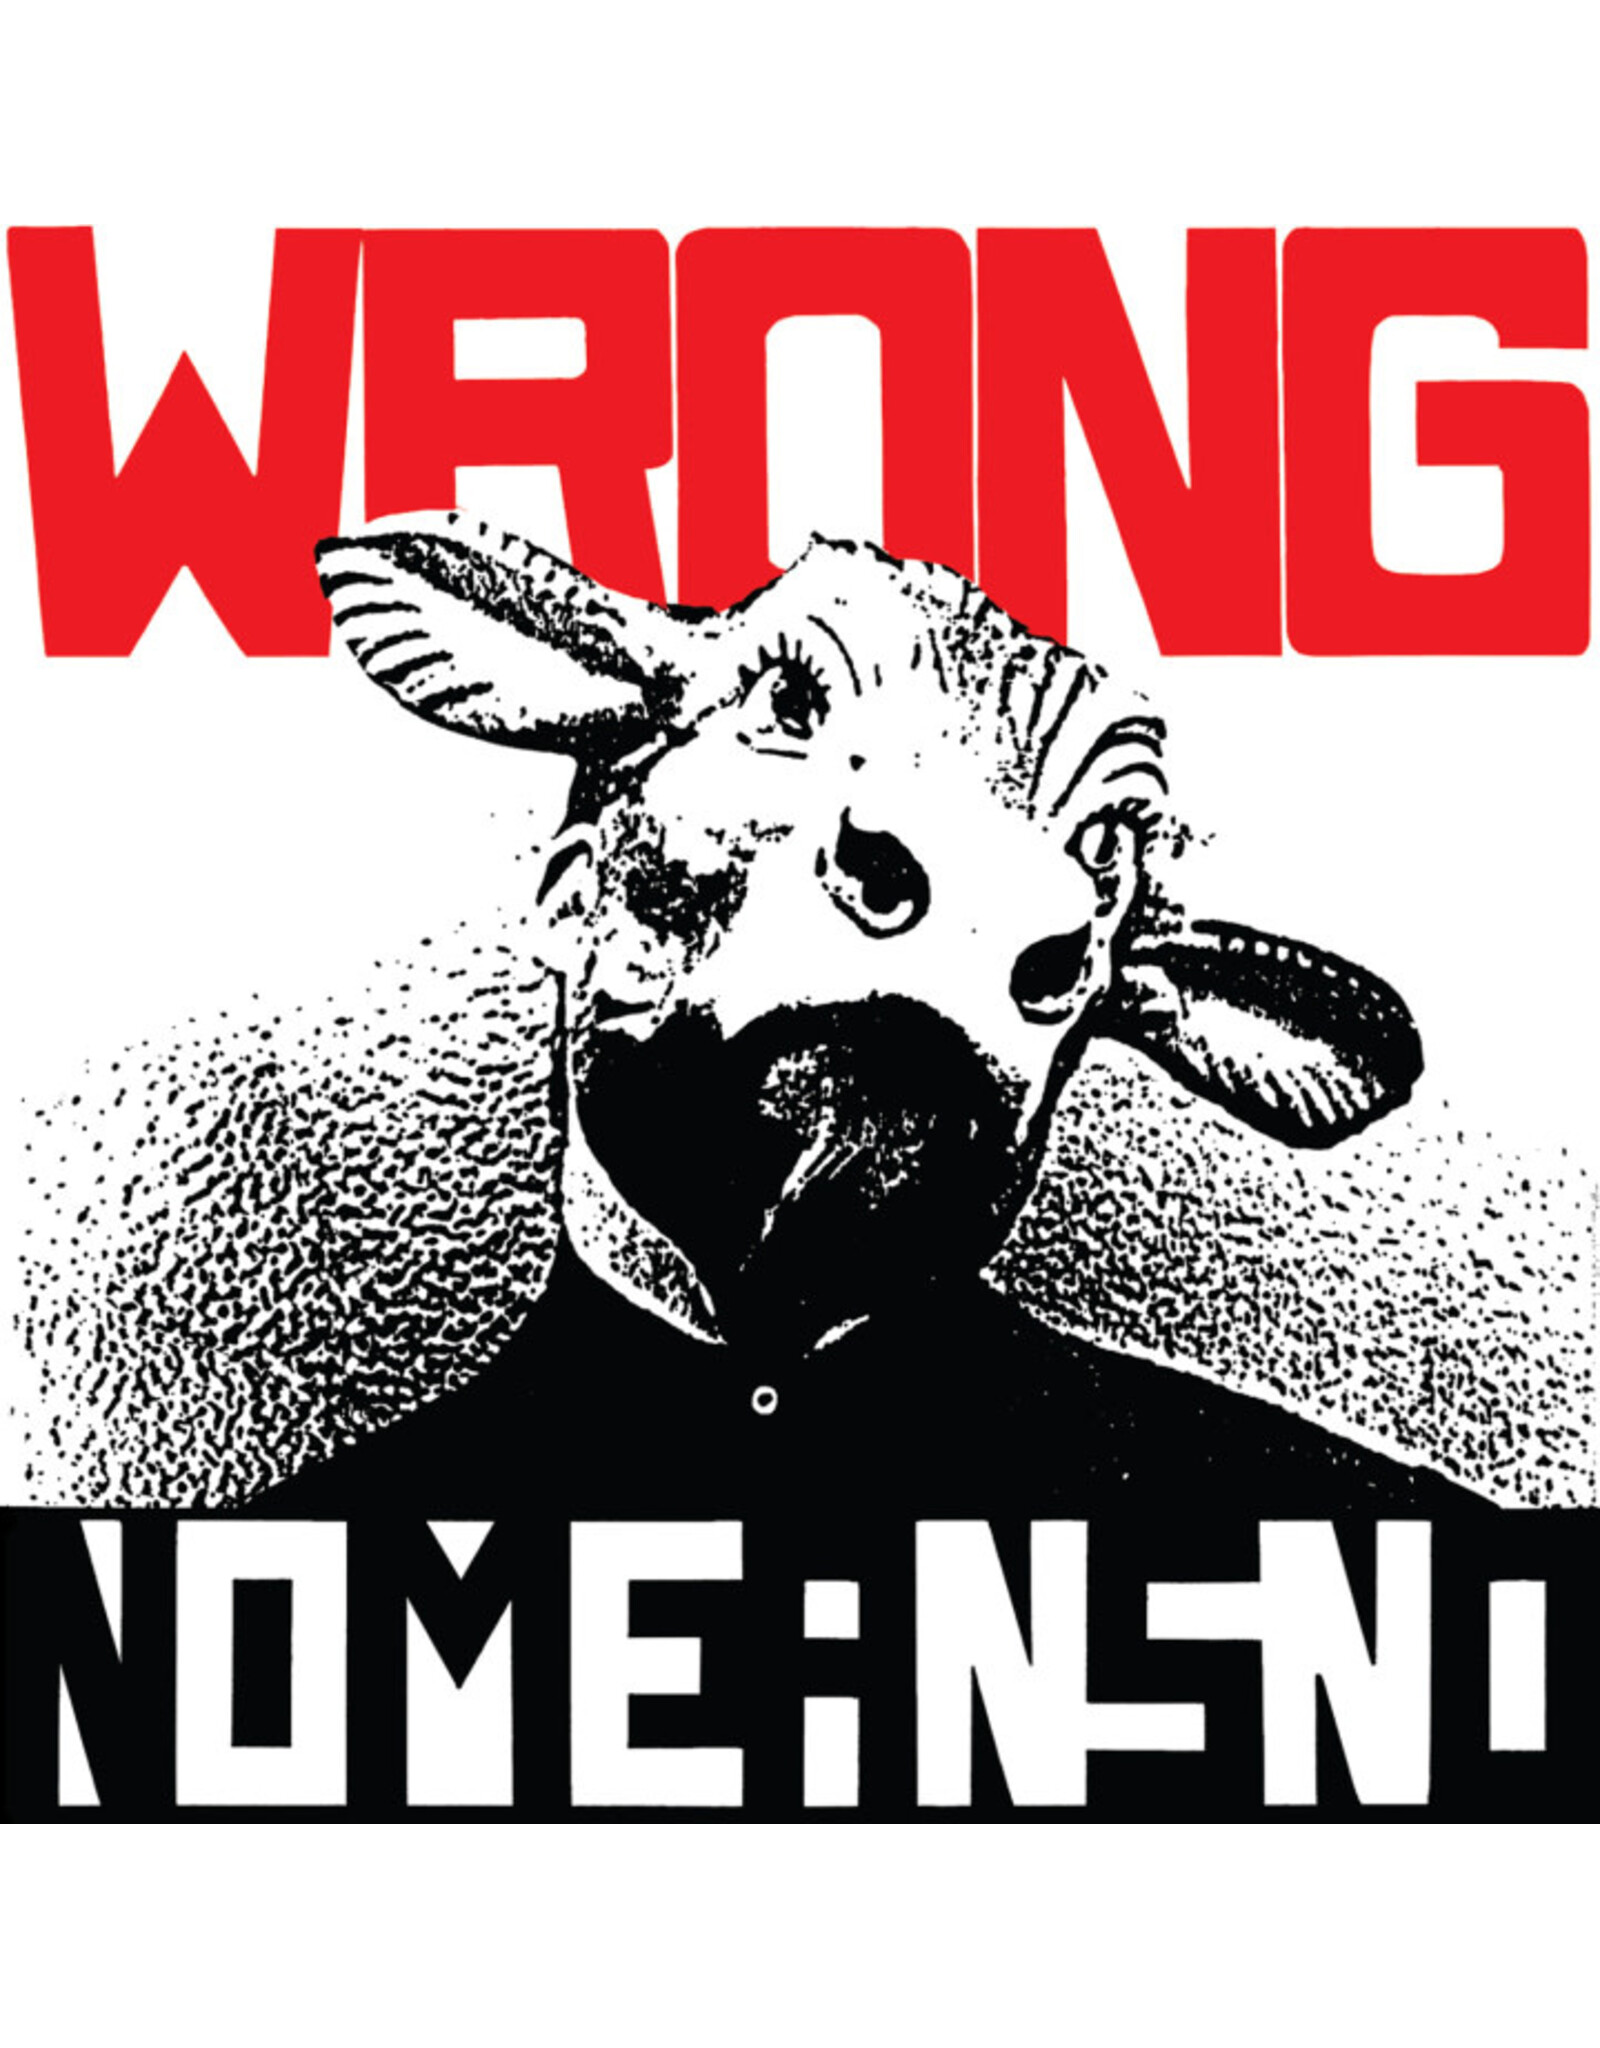 Alternative Tentacles Nomeansno: Wrong (Red) LP